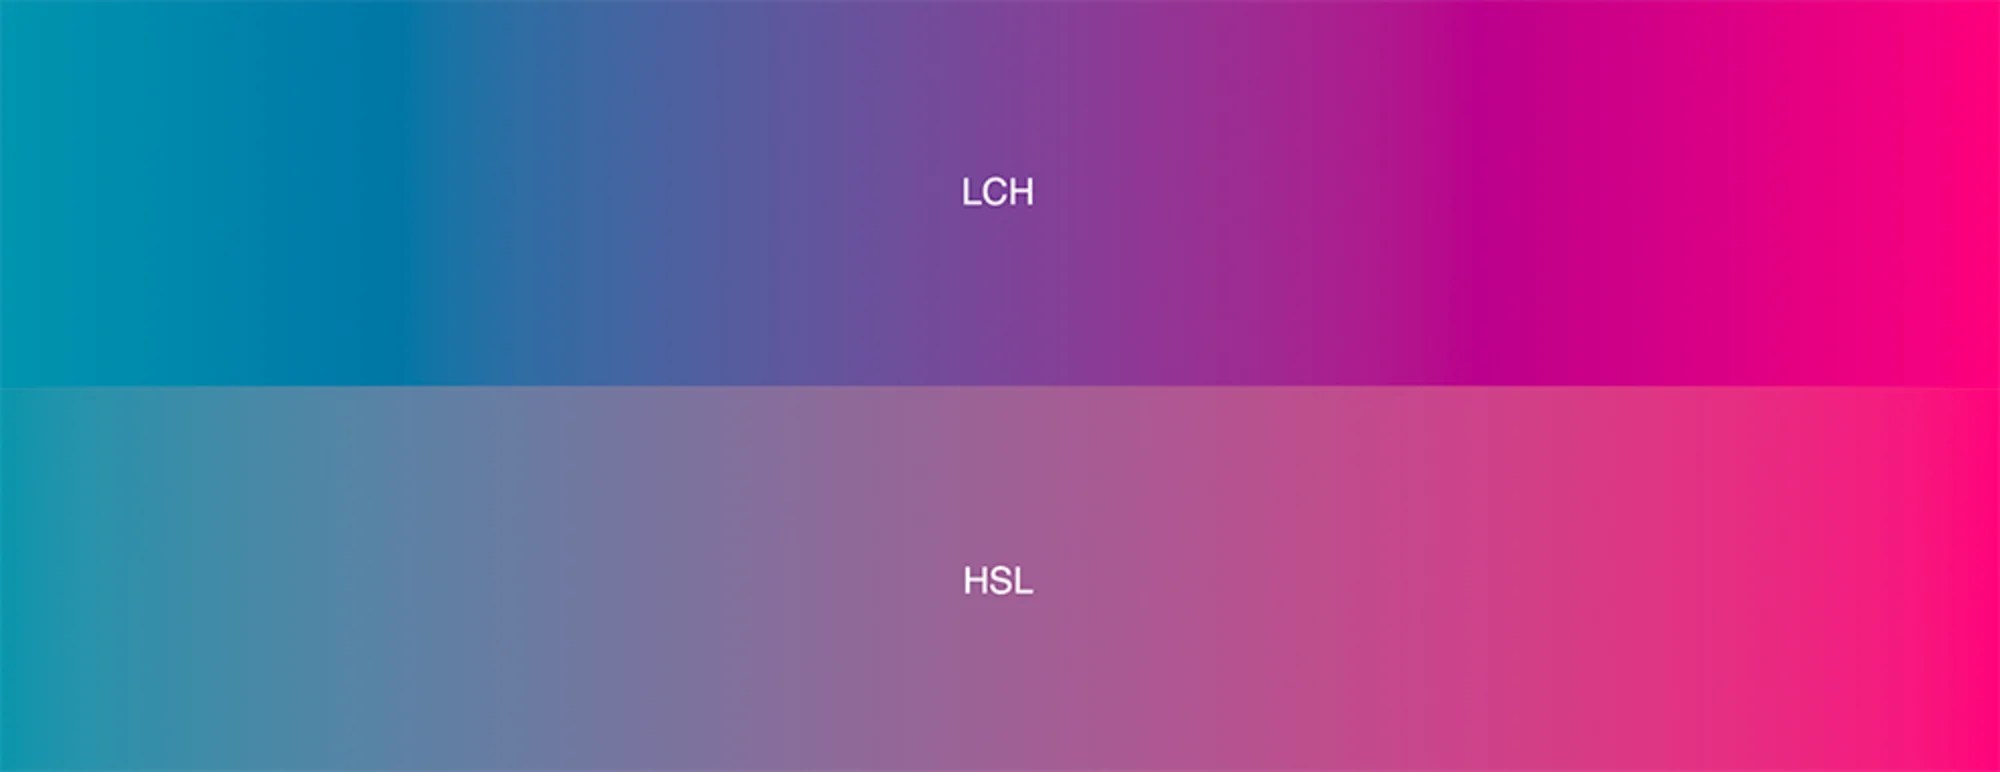 Two gradients going from blue to pink, one on top of the other. The first uses the LCH CSS color syntax and the second use HSL. HSL has noticeable gray areas.